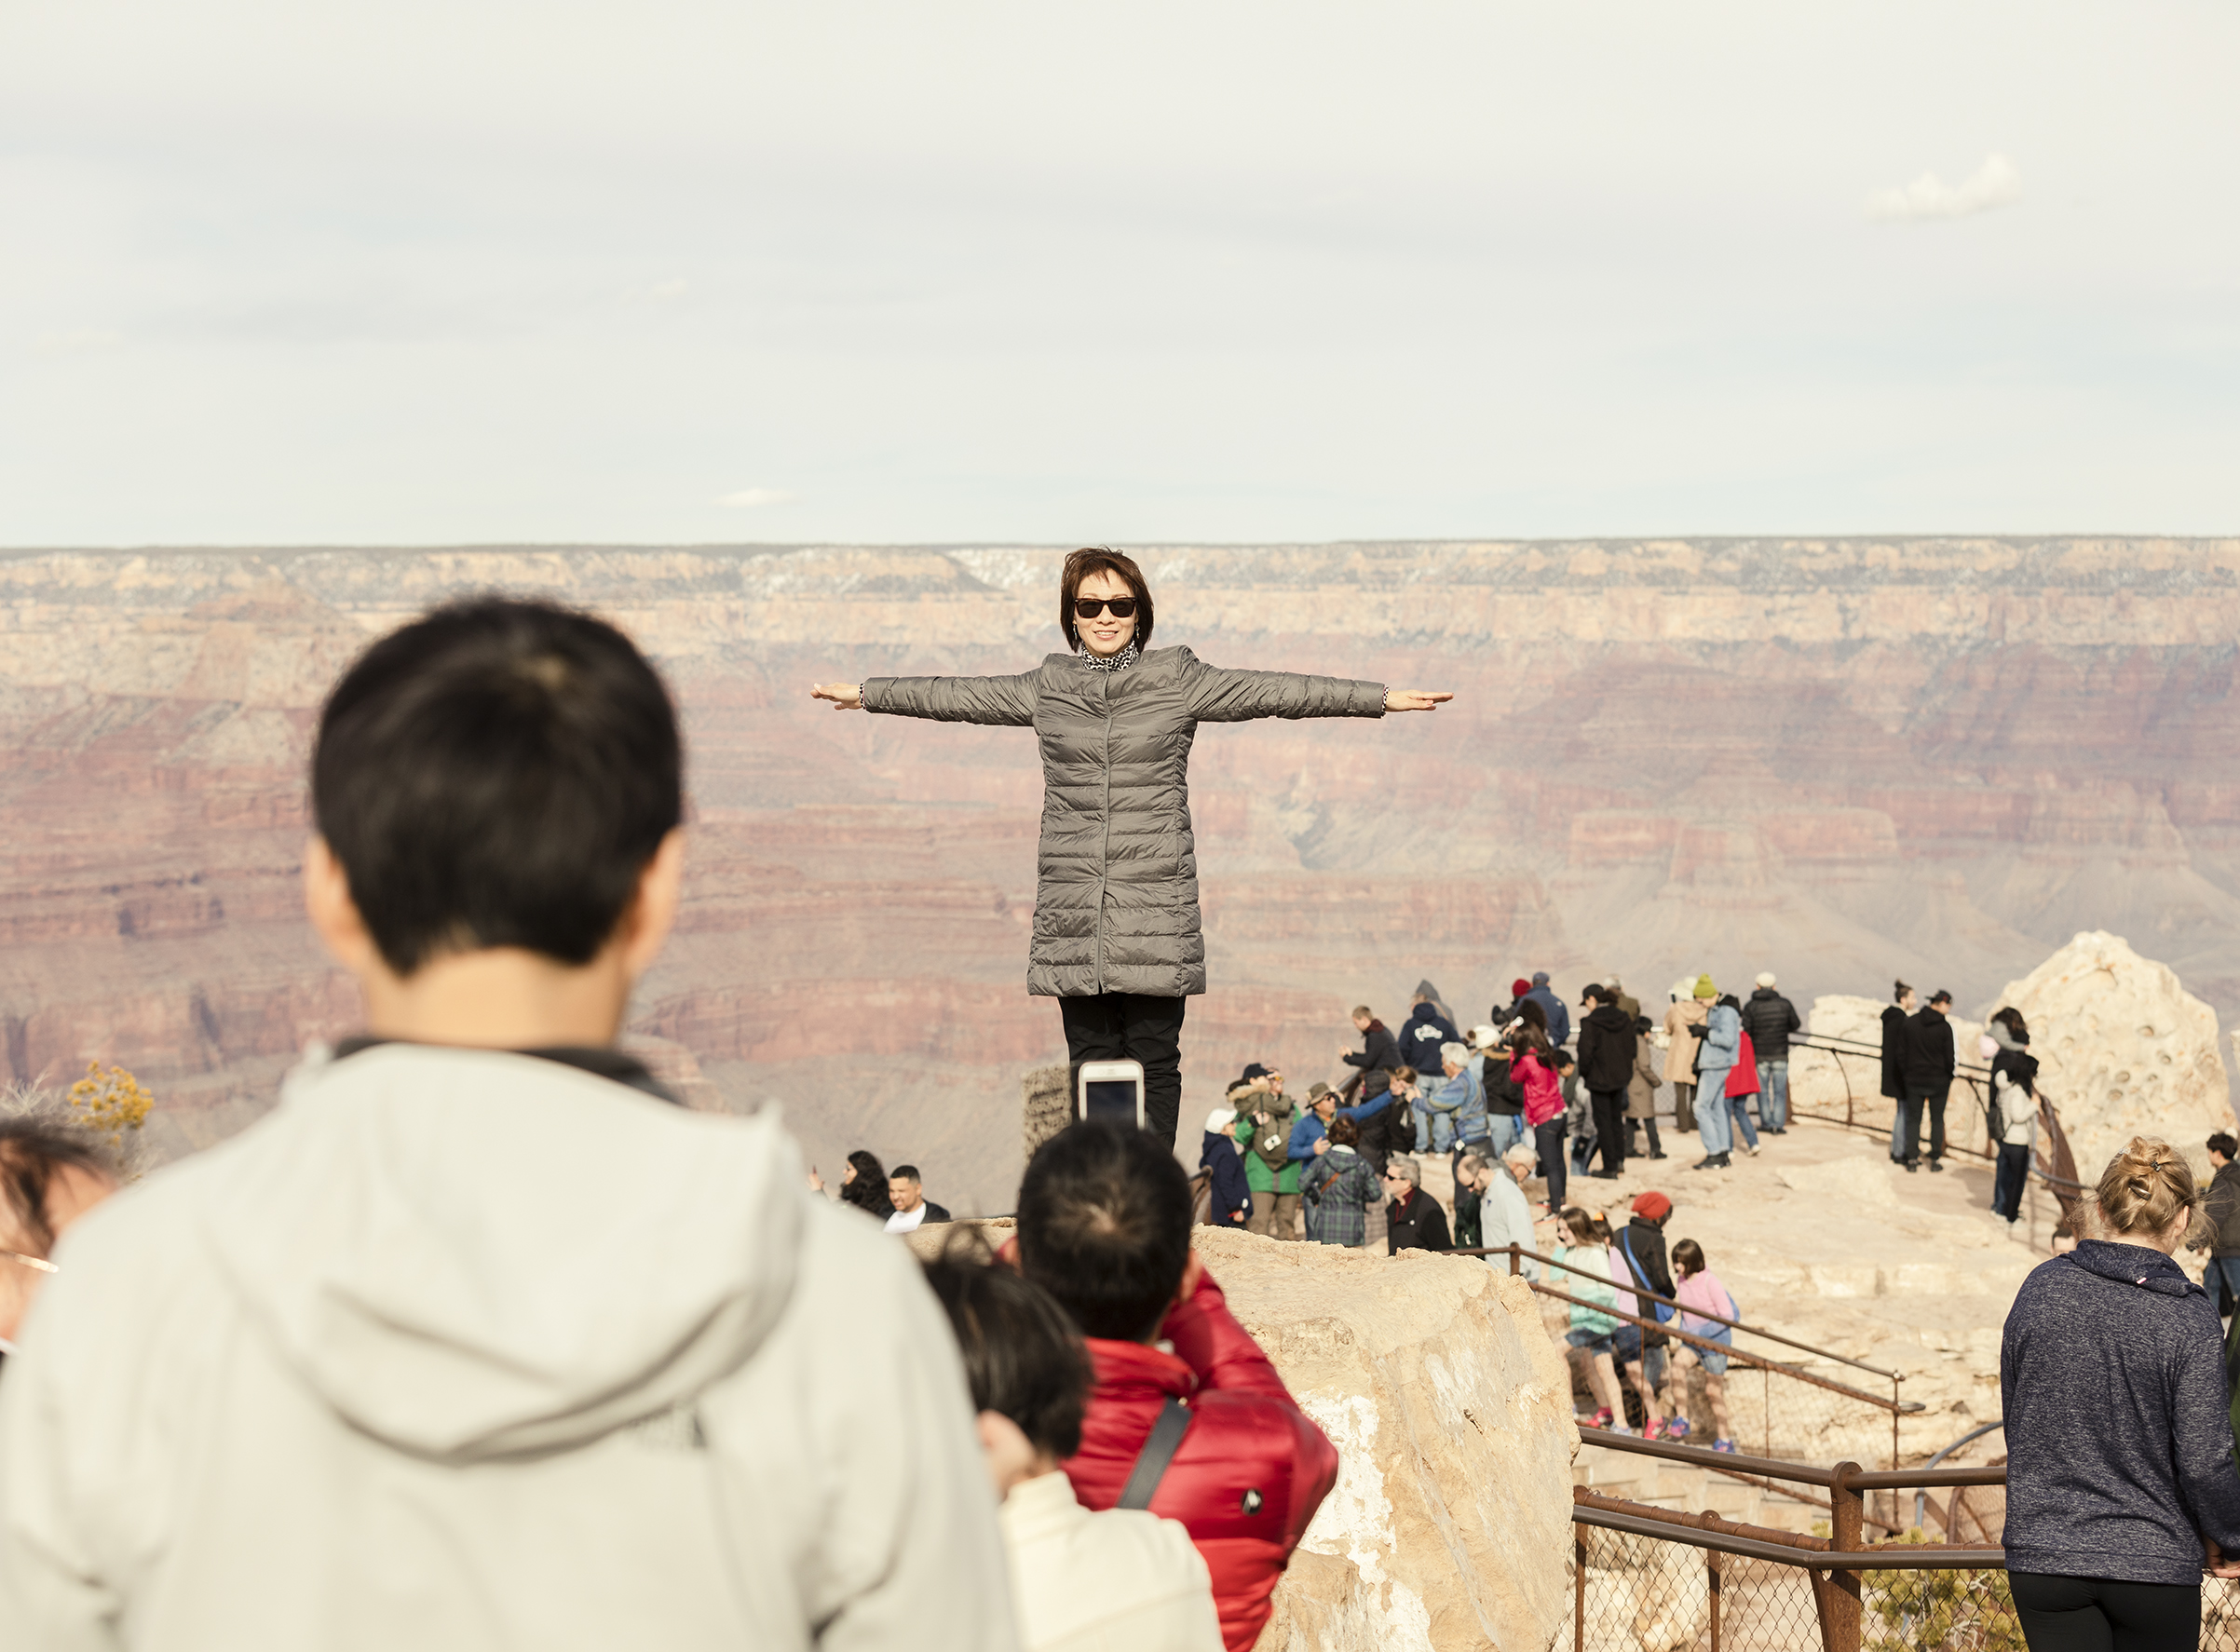 A visitor poses for a photo at Grand Canyon National Park on March 1 (Jesse Rieser for TIME)